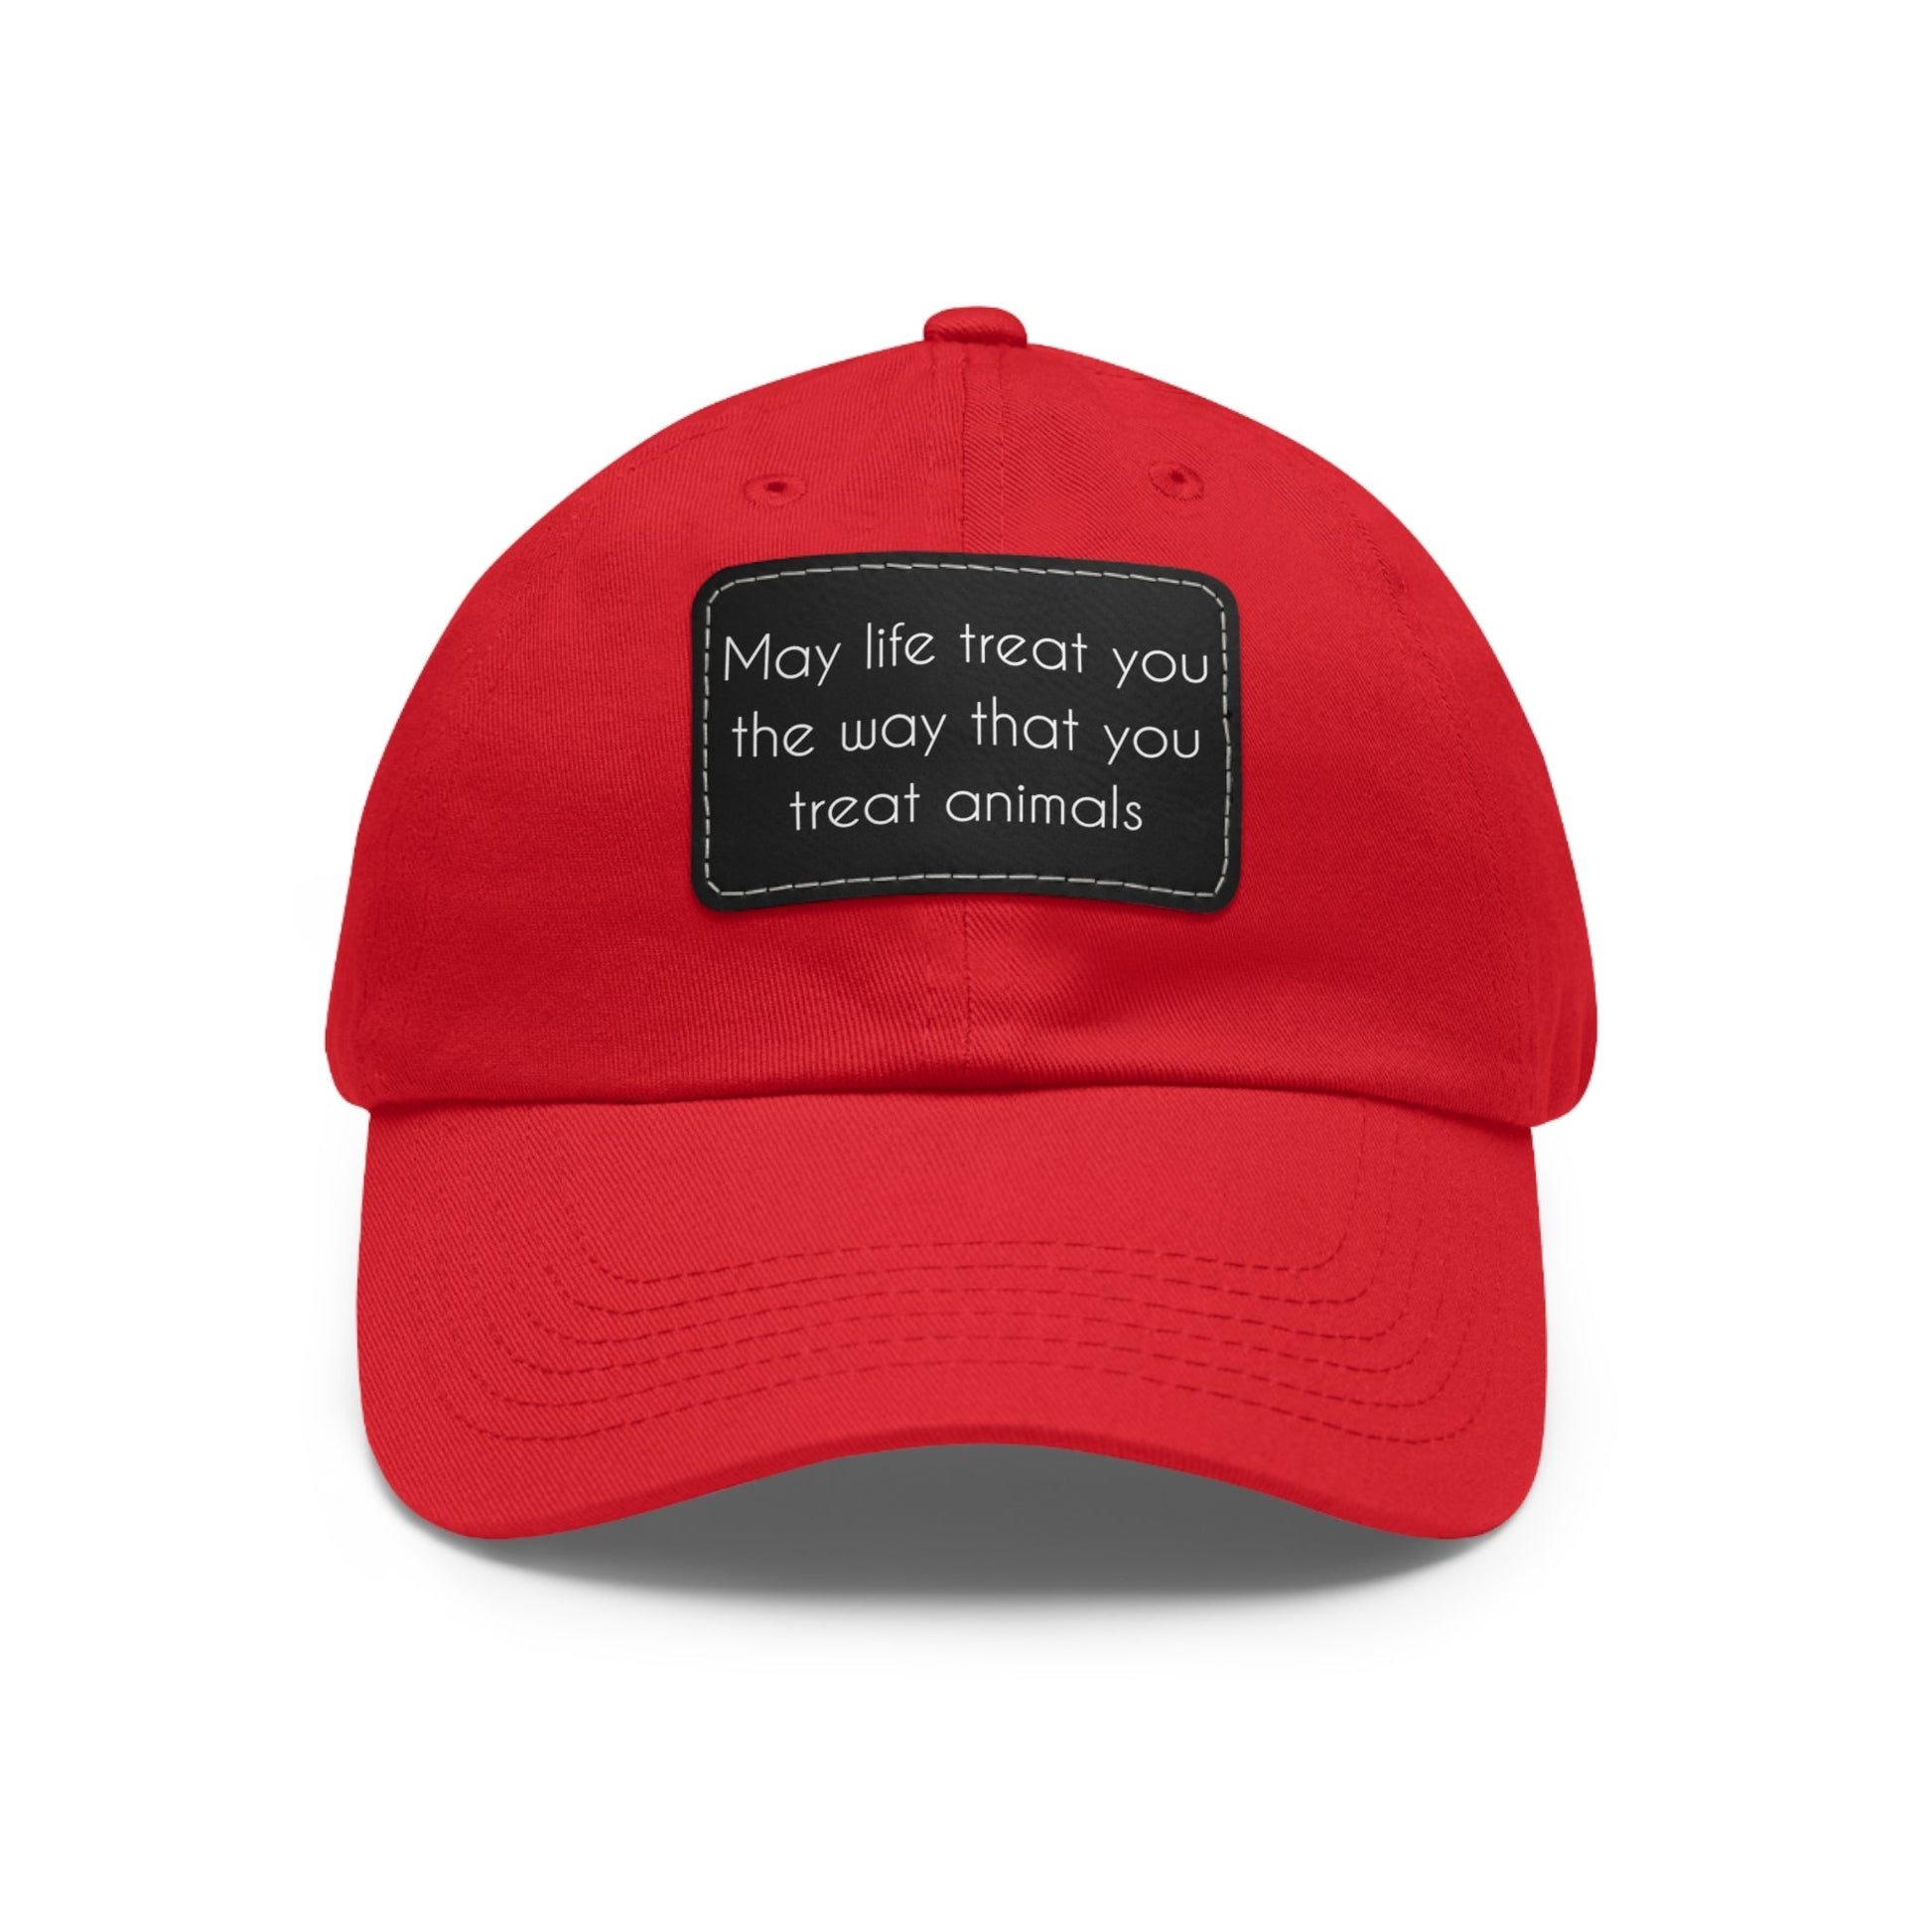 May Life Treat You The Way That You Treat Animals | Dad Hat - Detezi Designs-19056375873000906560